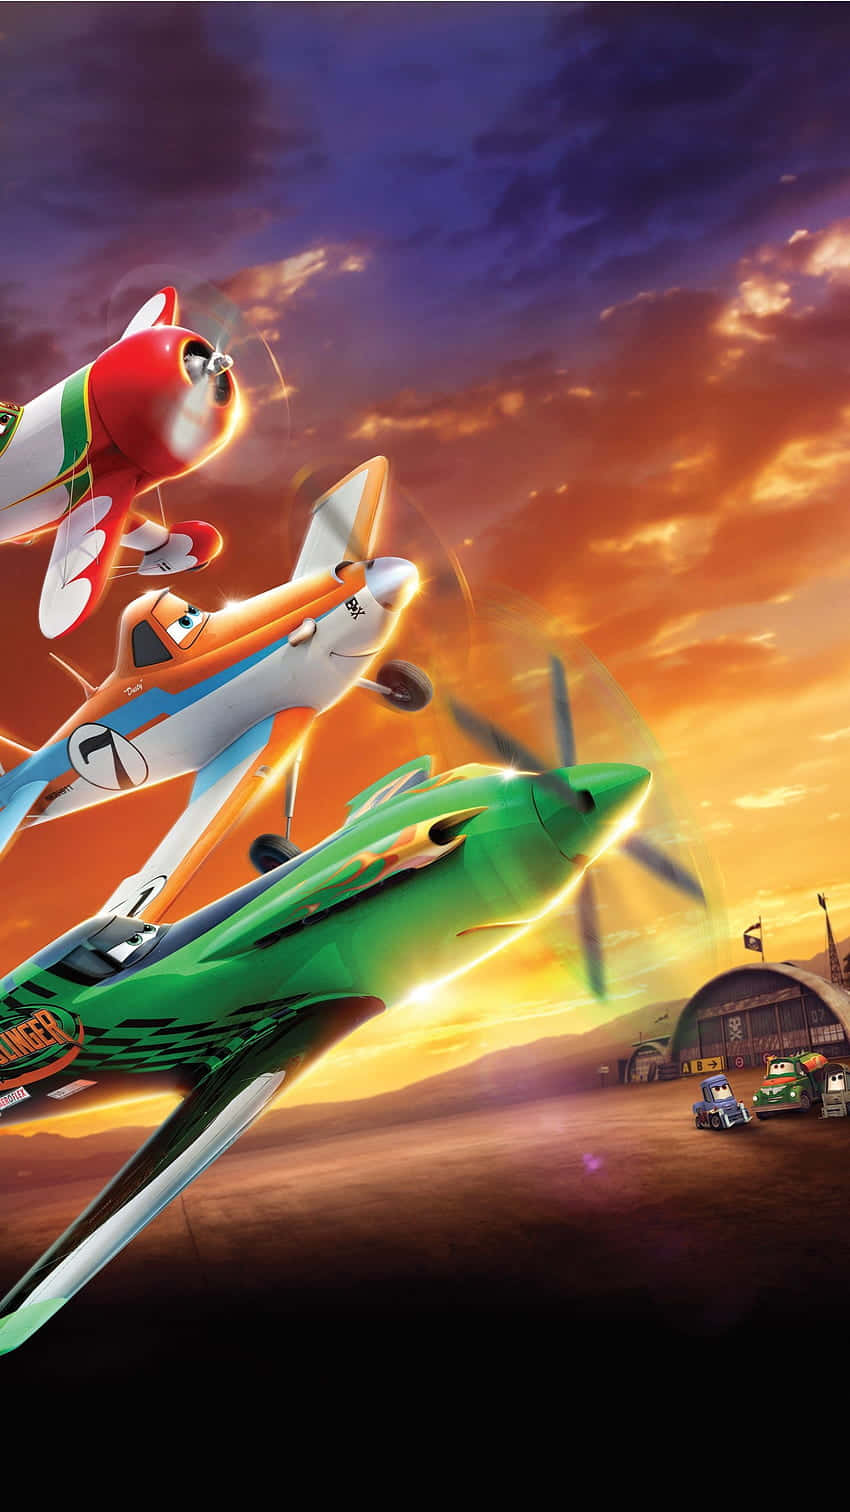 Caption: "dusty Crophopper Of Disney's Planes Flying High In The Sky" Wallpaper